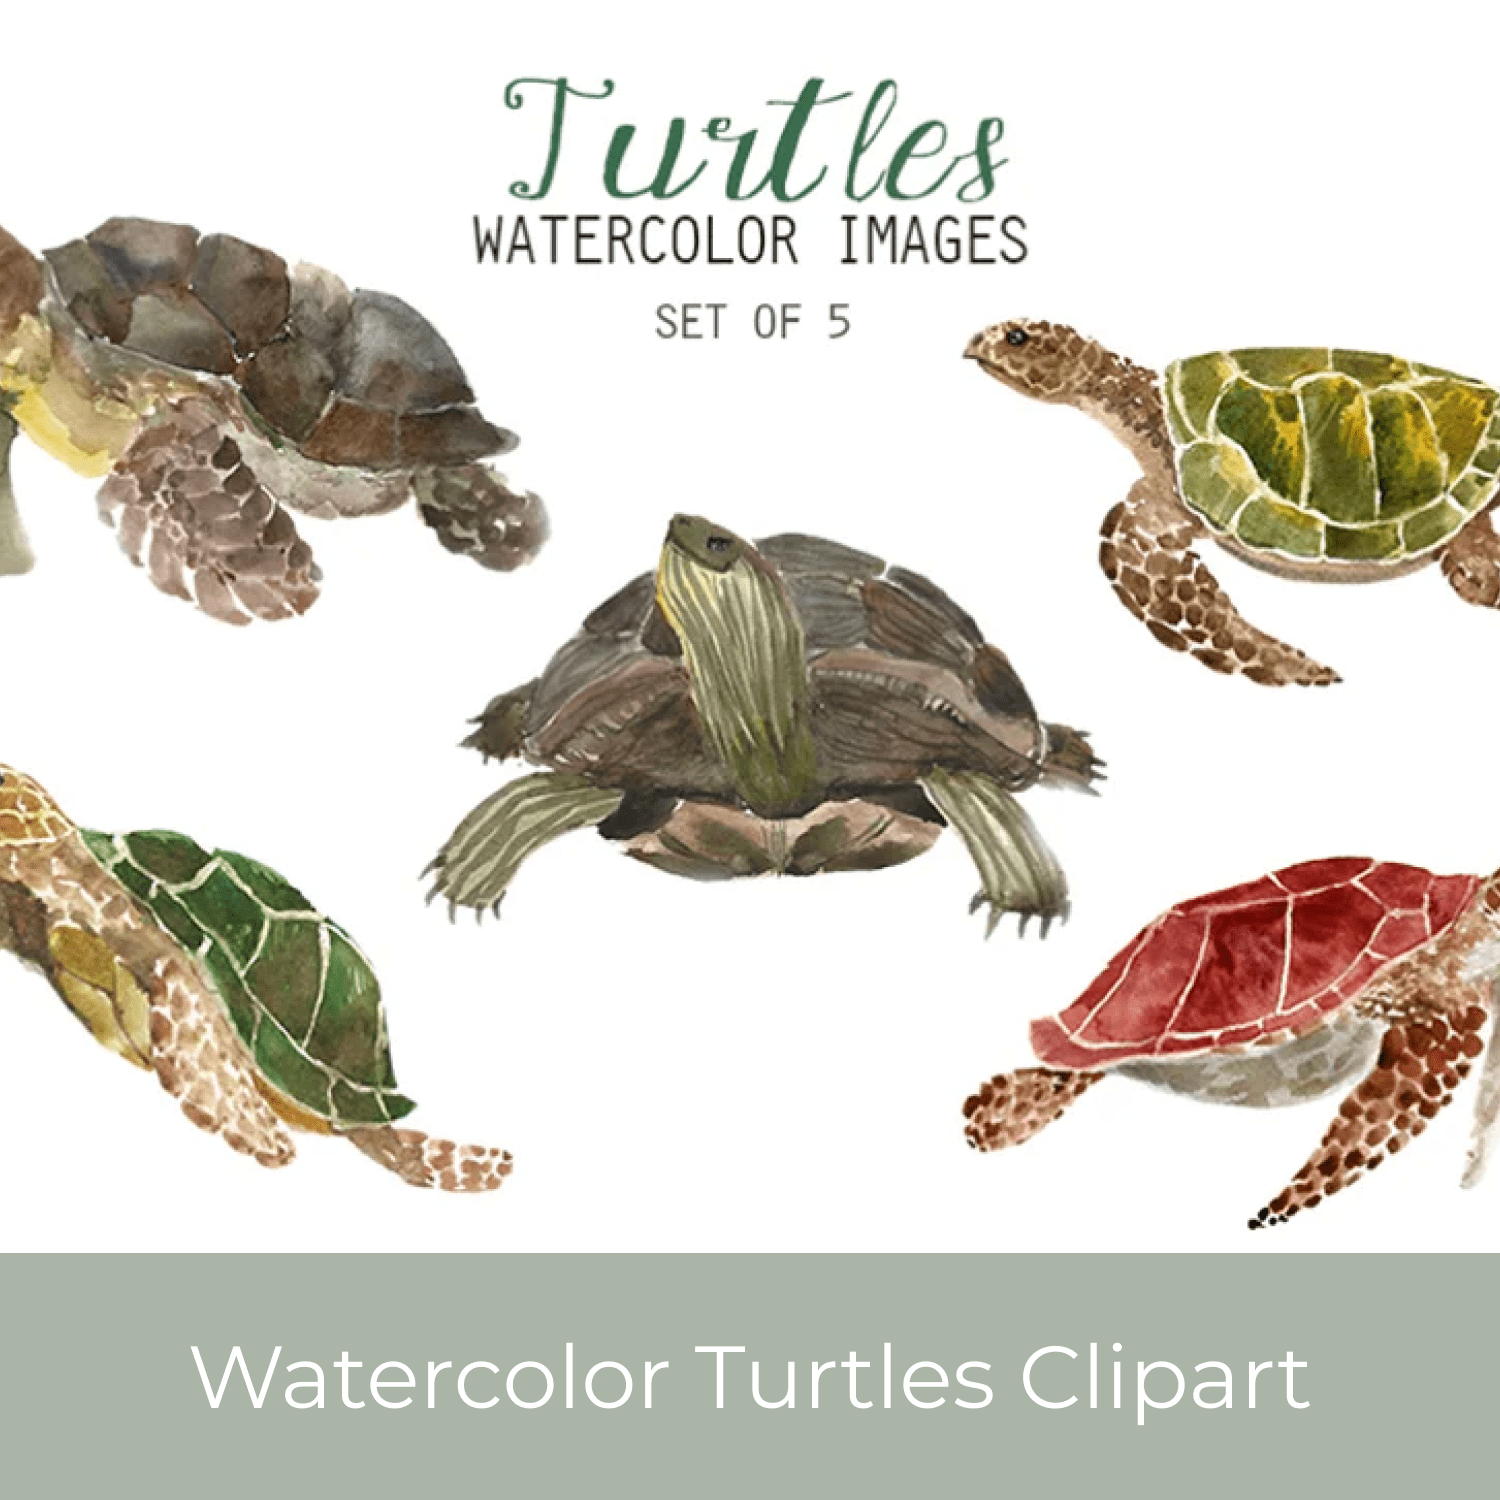 Watercolor Turtles Clipart cover.